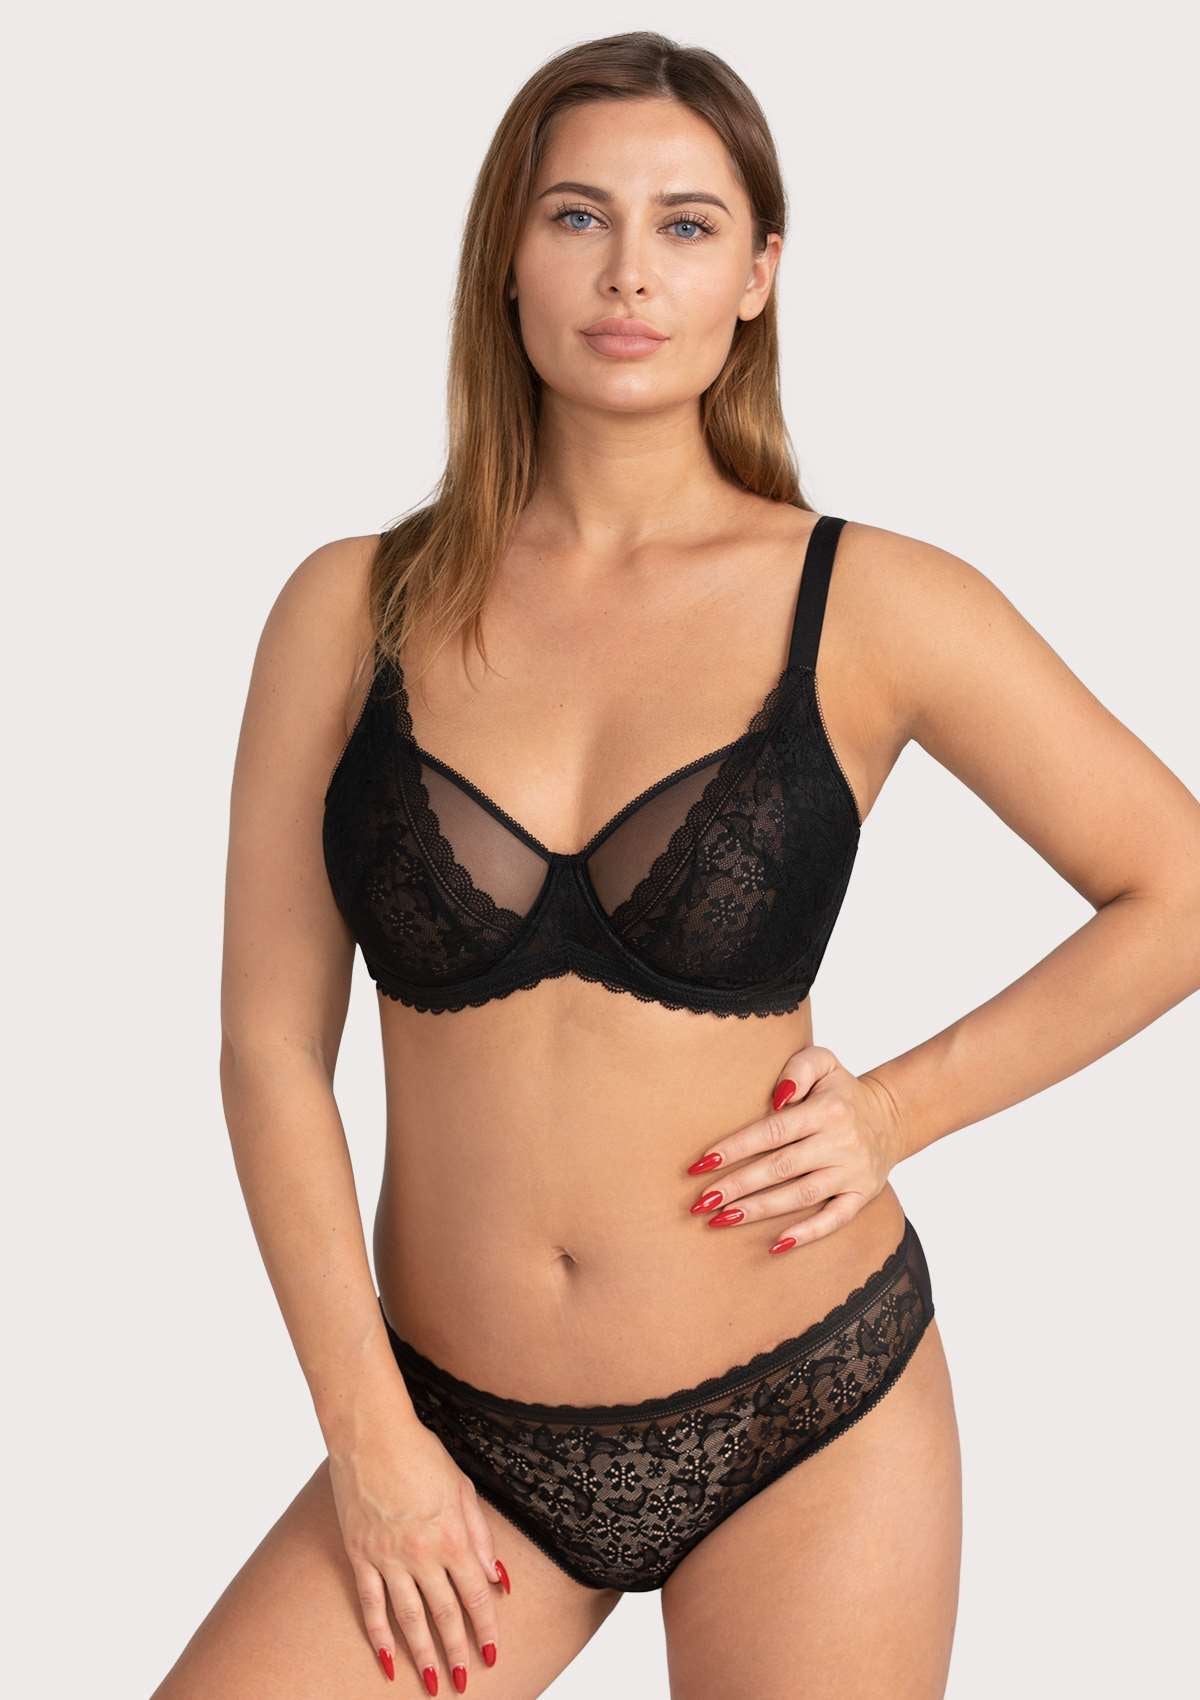 HSIA Anemone Lace Bra And Panties: Back Support Wired Bra - Black / 40 / C